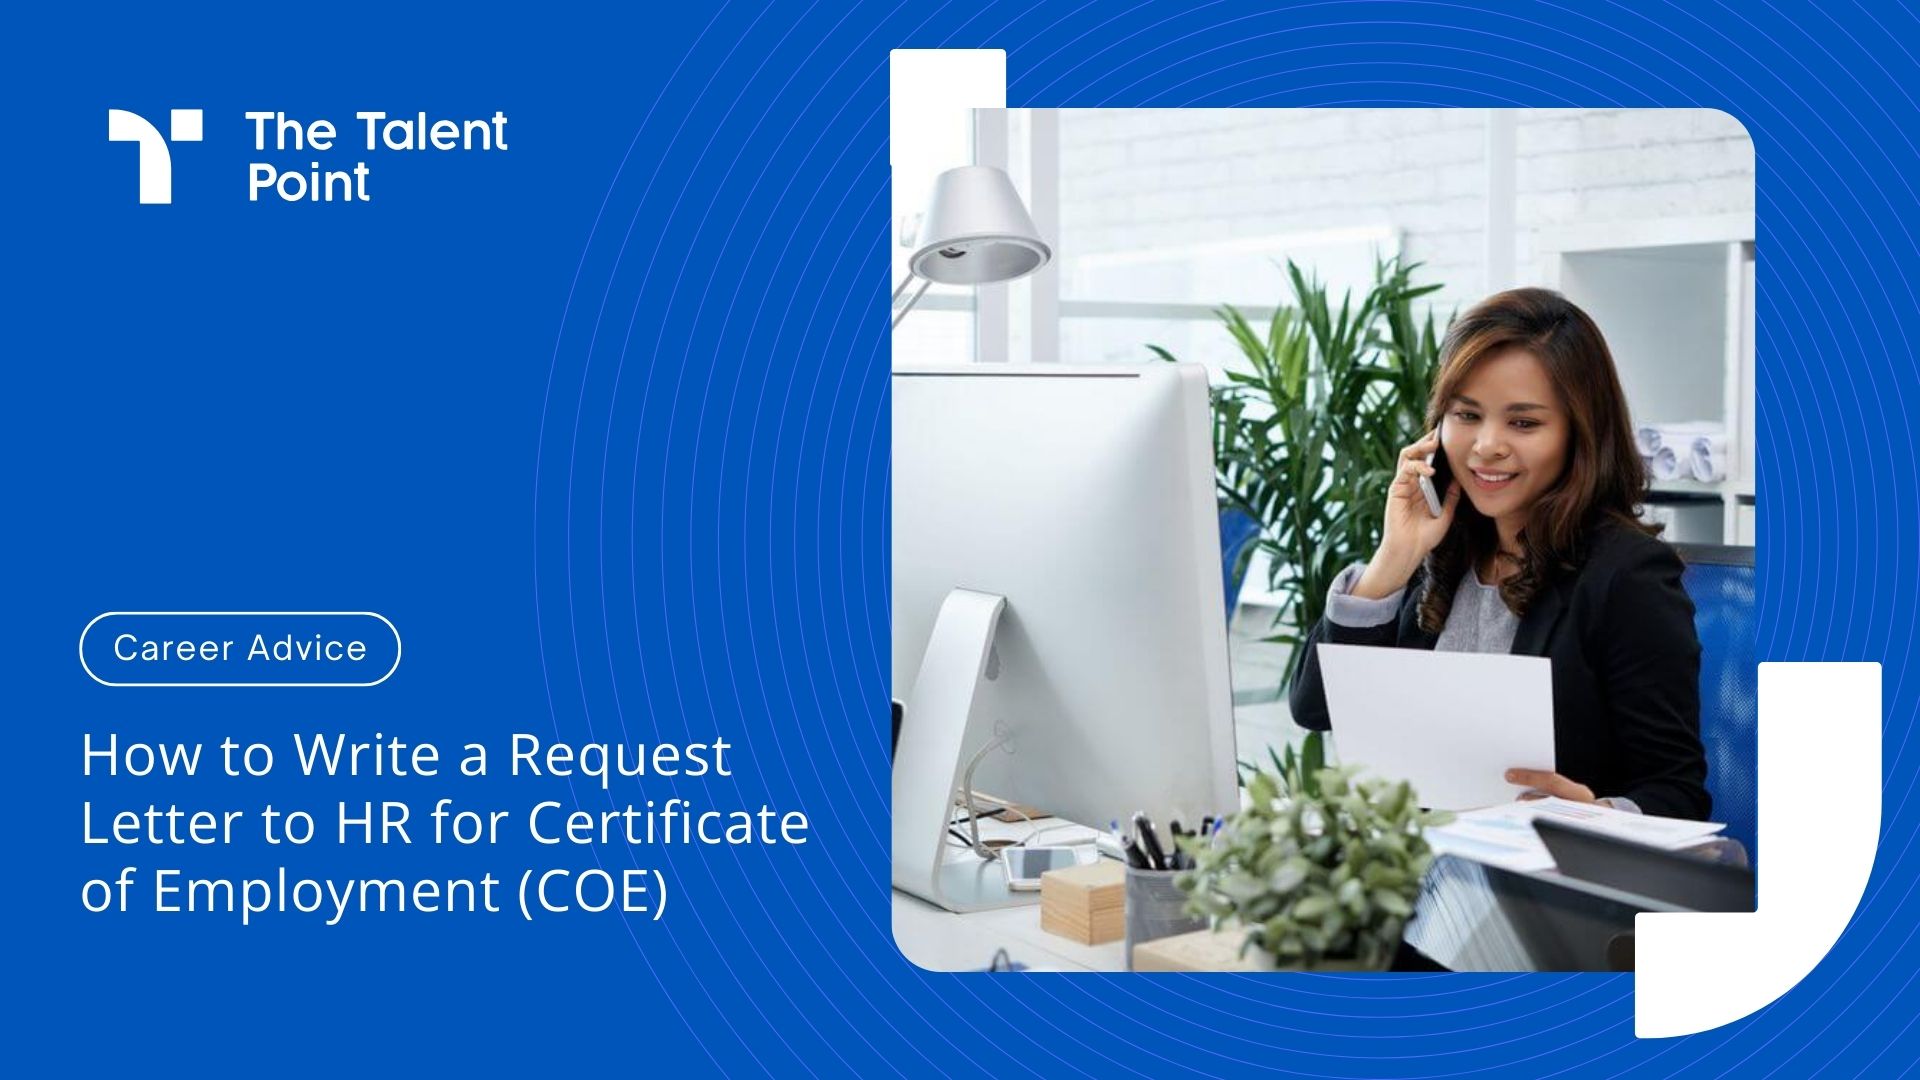 How to Write Request Letter to HR for Certificate of Employment (COE) to HR :